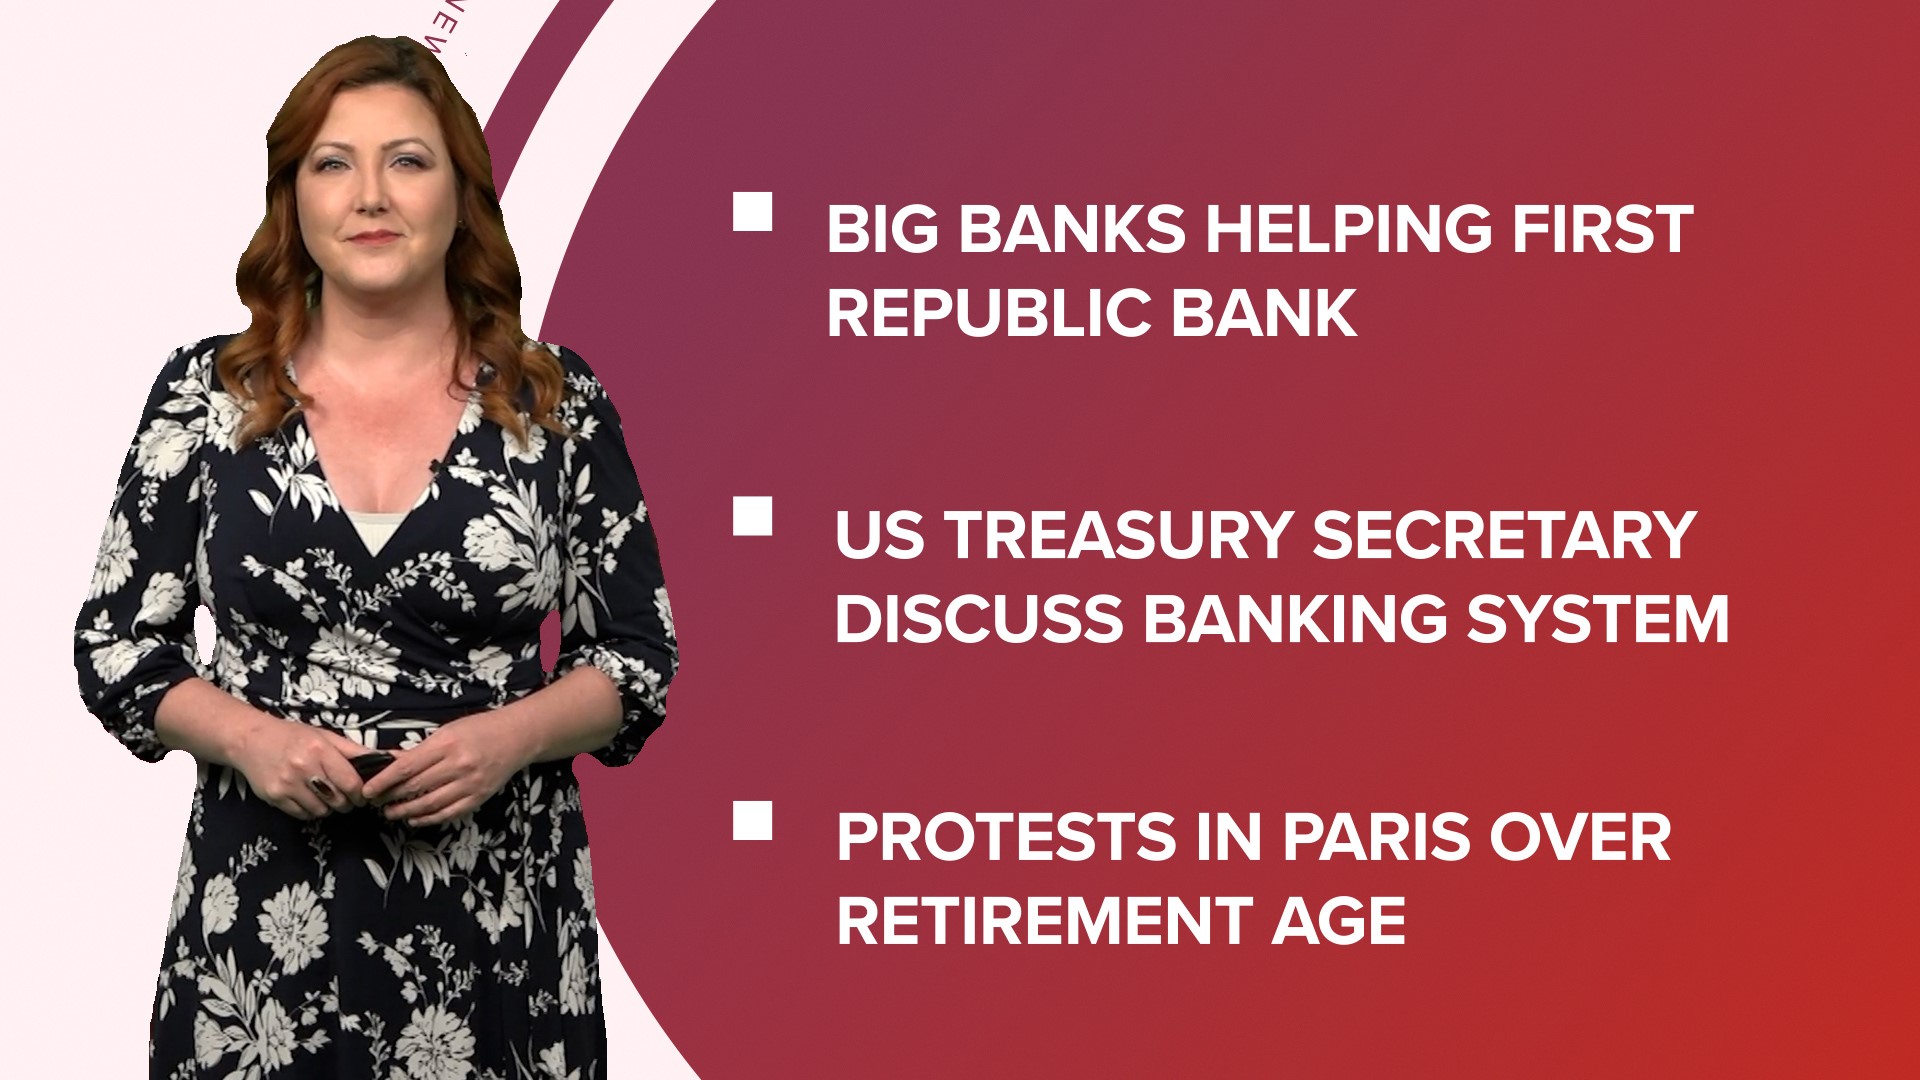 A look at what is happening in the news from protests over retirement age in France to TikTok ban talks in Congress and the start of Taylor Swift's Eras tour.